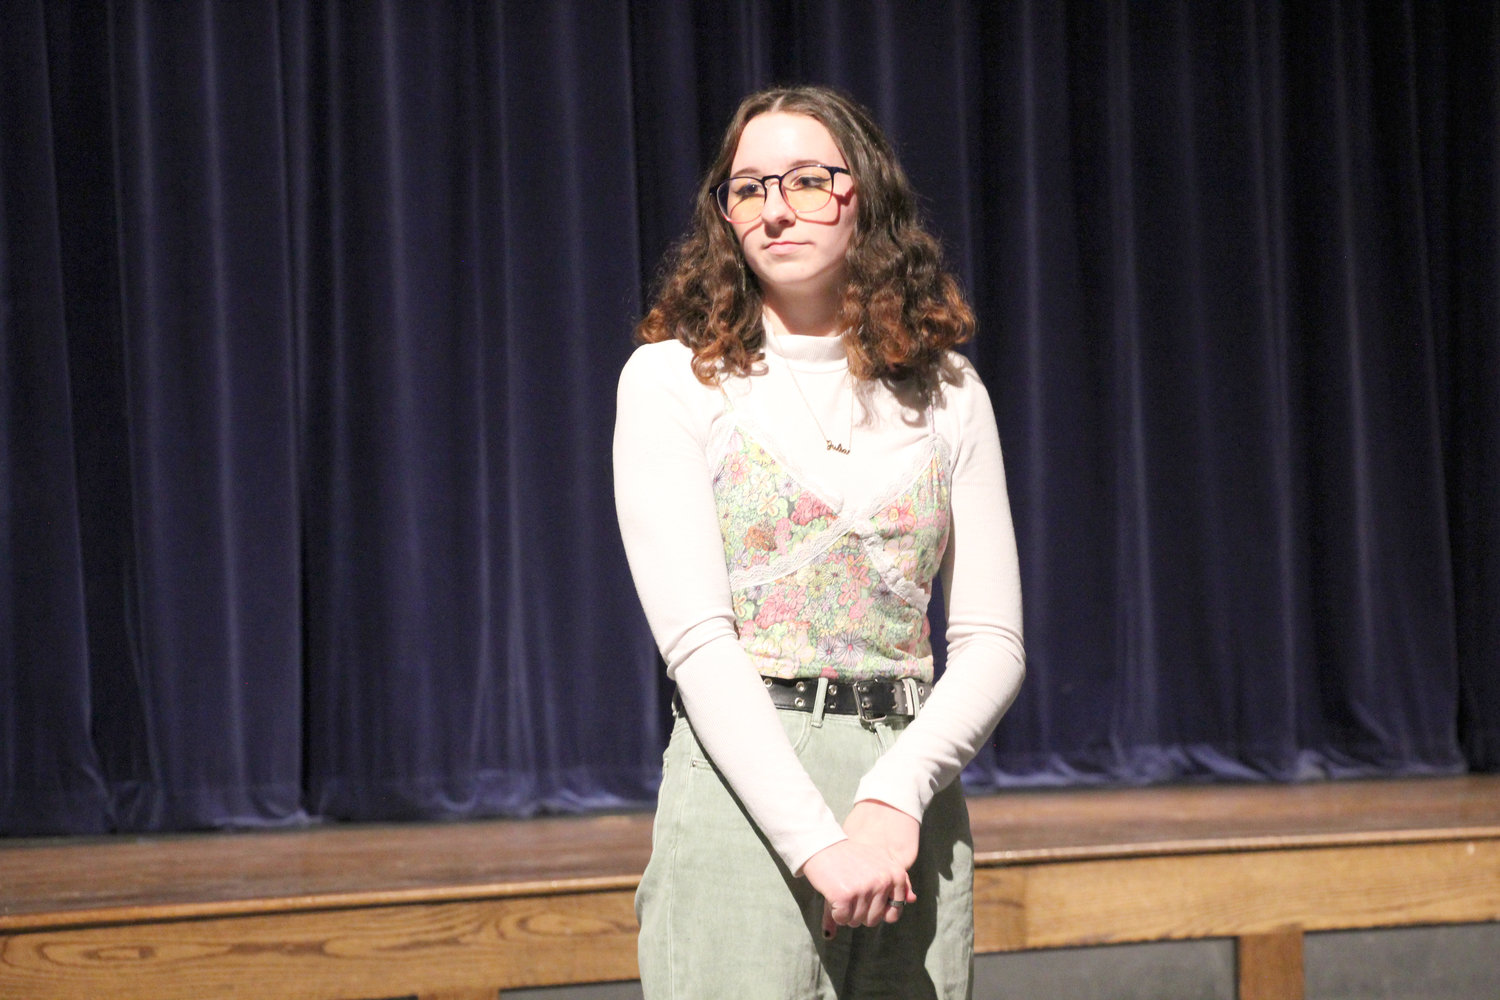 Tri-Valley Senior Samantha Morgan sang “How Do I Love You, based on the poem “How Do I Love Thee” by Elizabeth Barrett Browning.